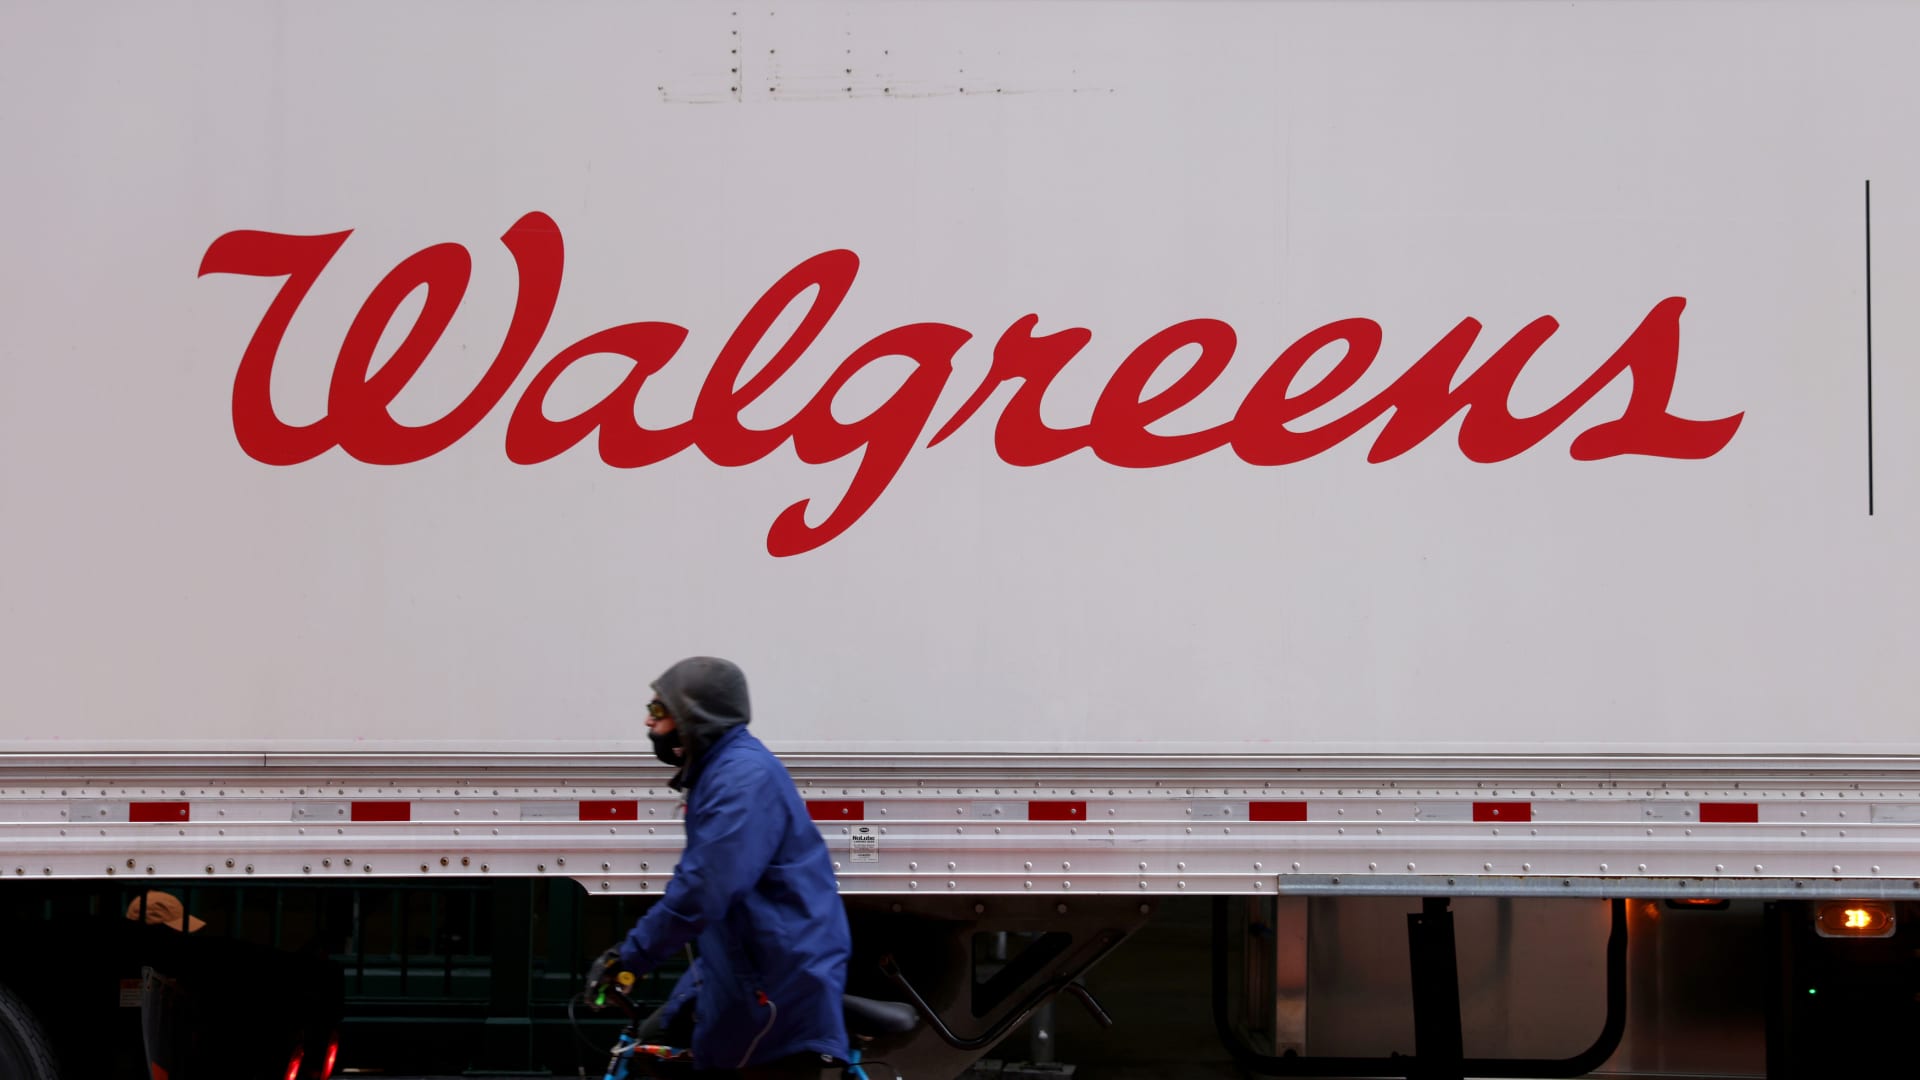 A person rides past a Walgreens truck, owned by the Walgreens Boots Alliance, in Manhattan, New York City, on Nov. 26, 2021.